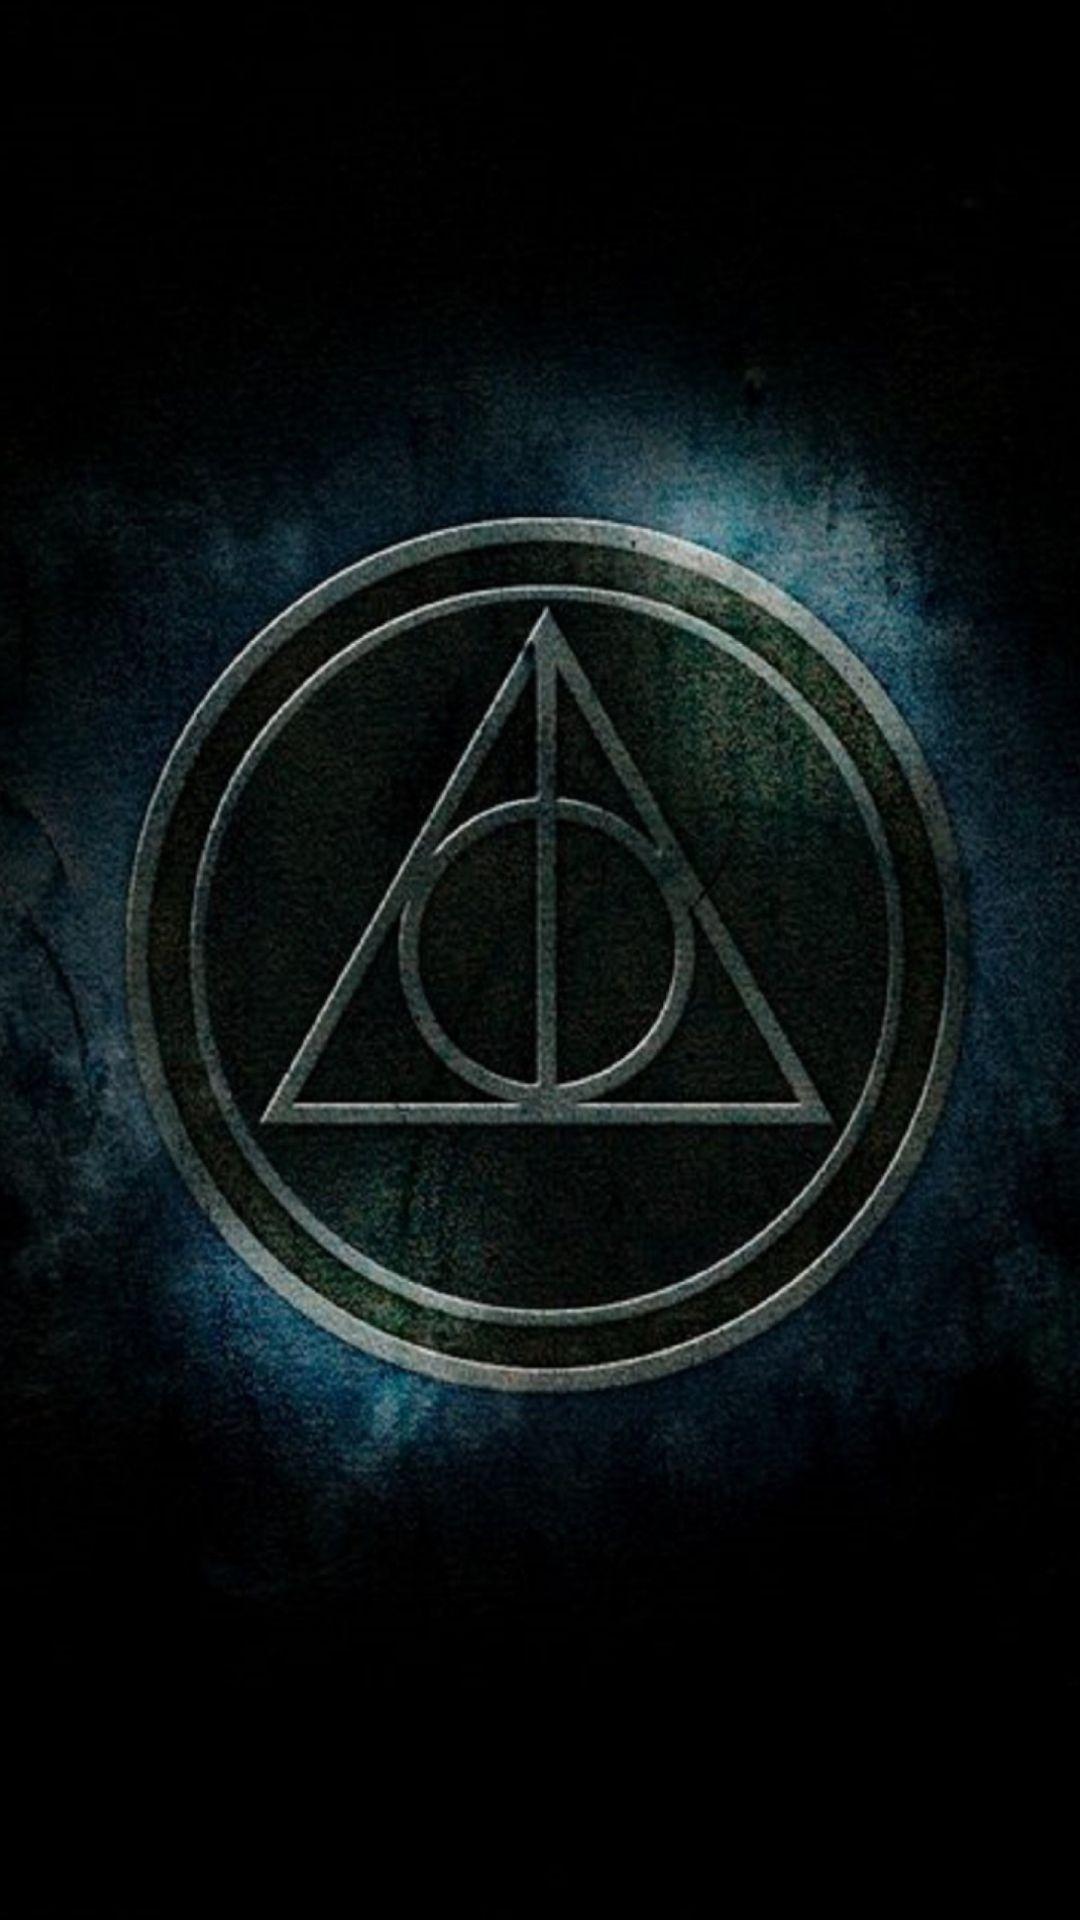 harry potter and the deathly hallows pdf